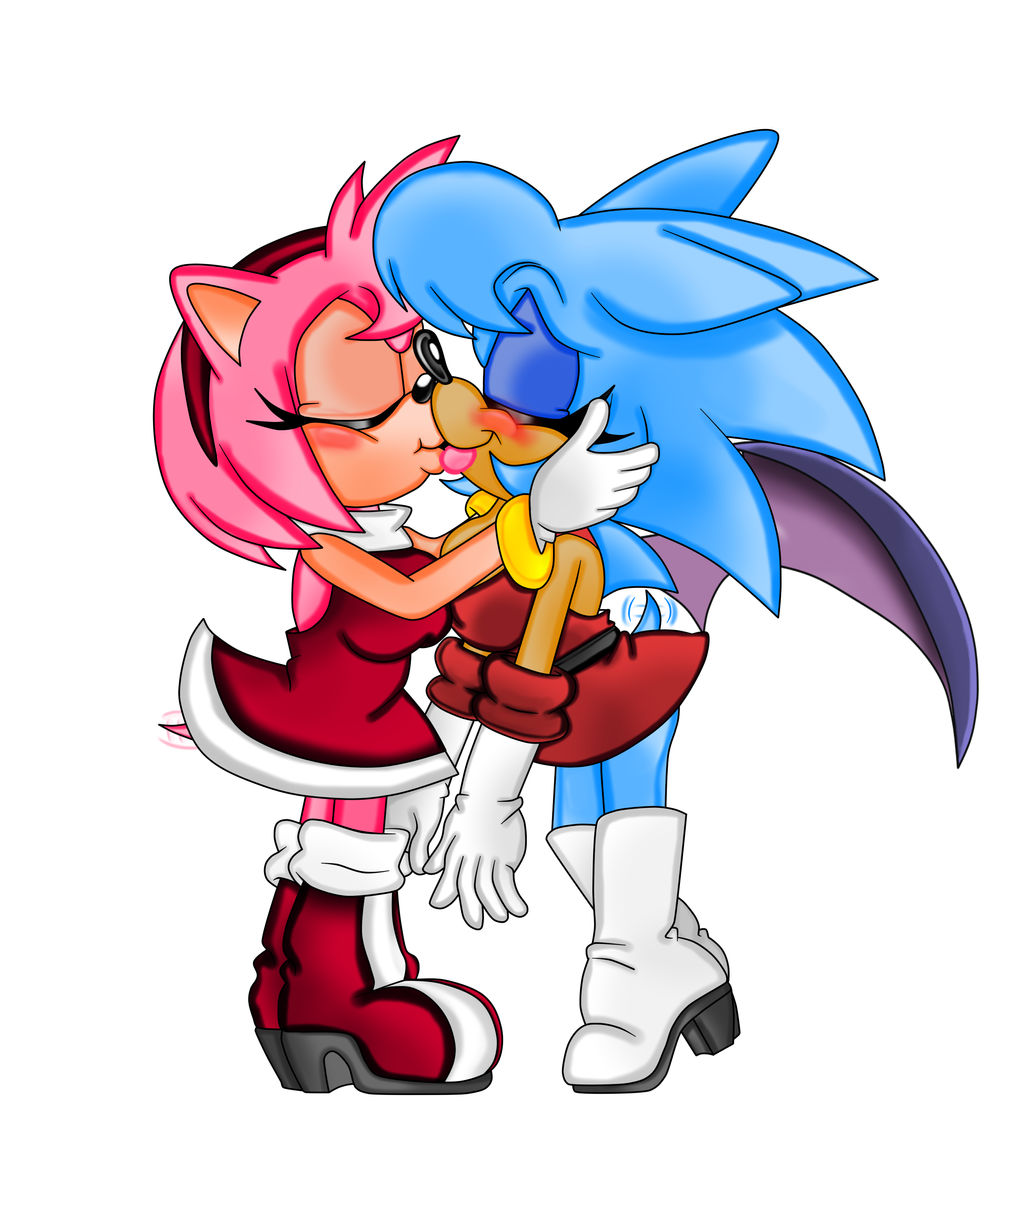 SONIC AND AMY KISS?! Sonic and Amy's Second Date 